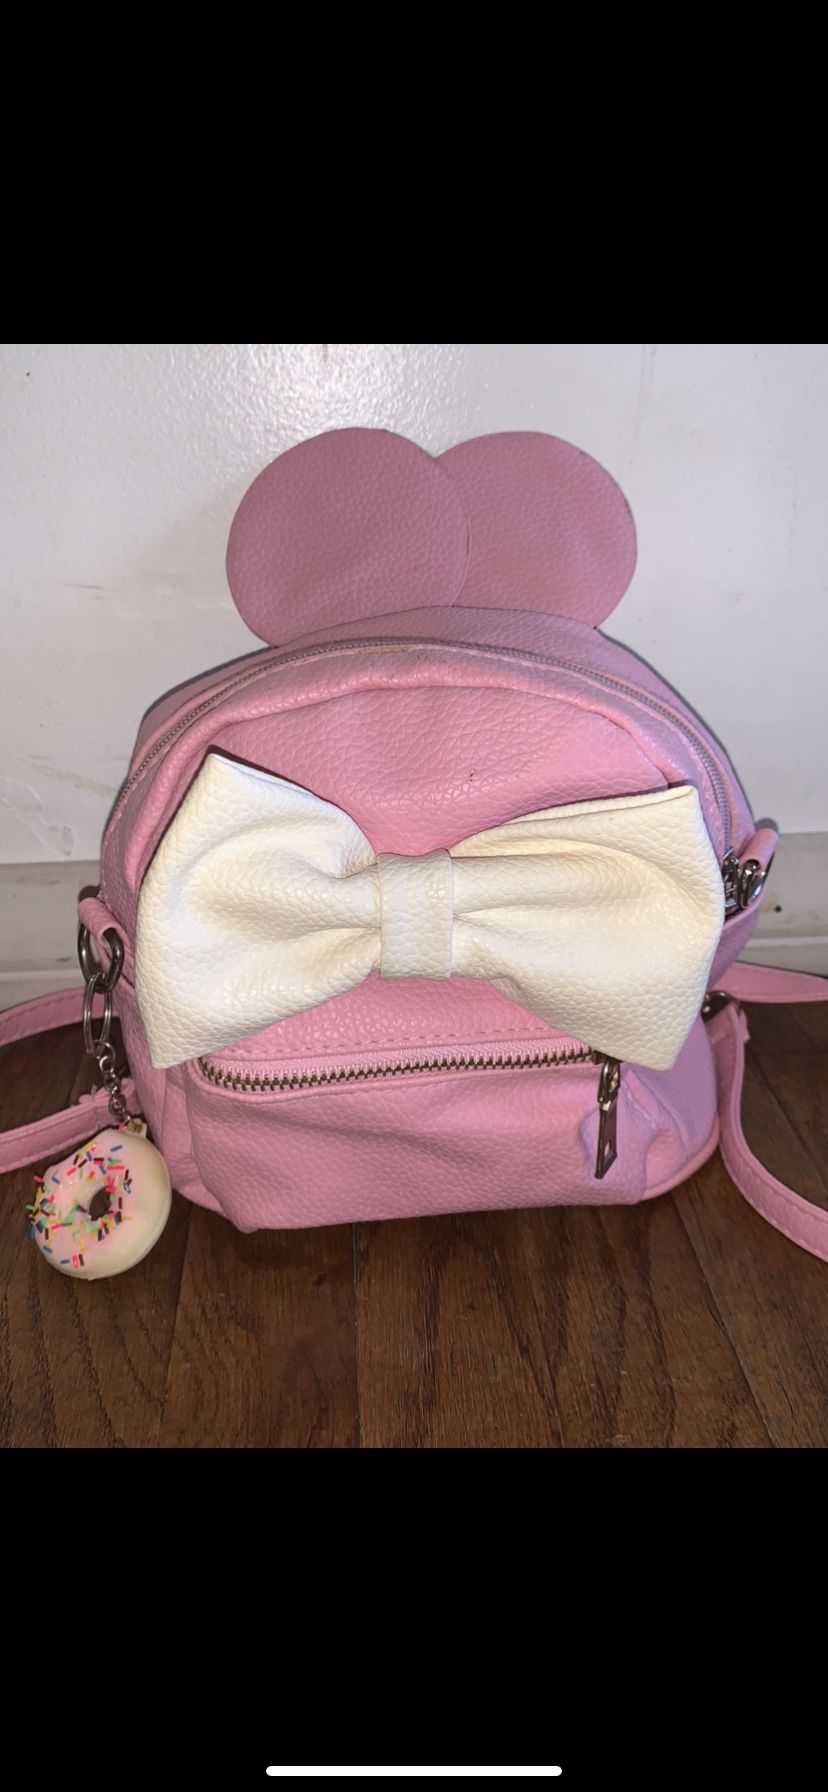 Pink Minnie Mouse backpack